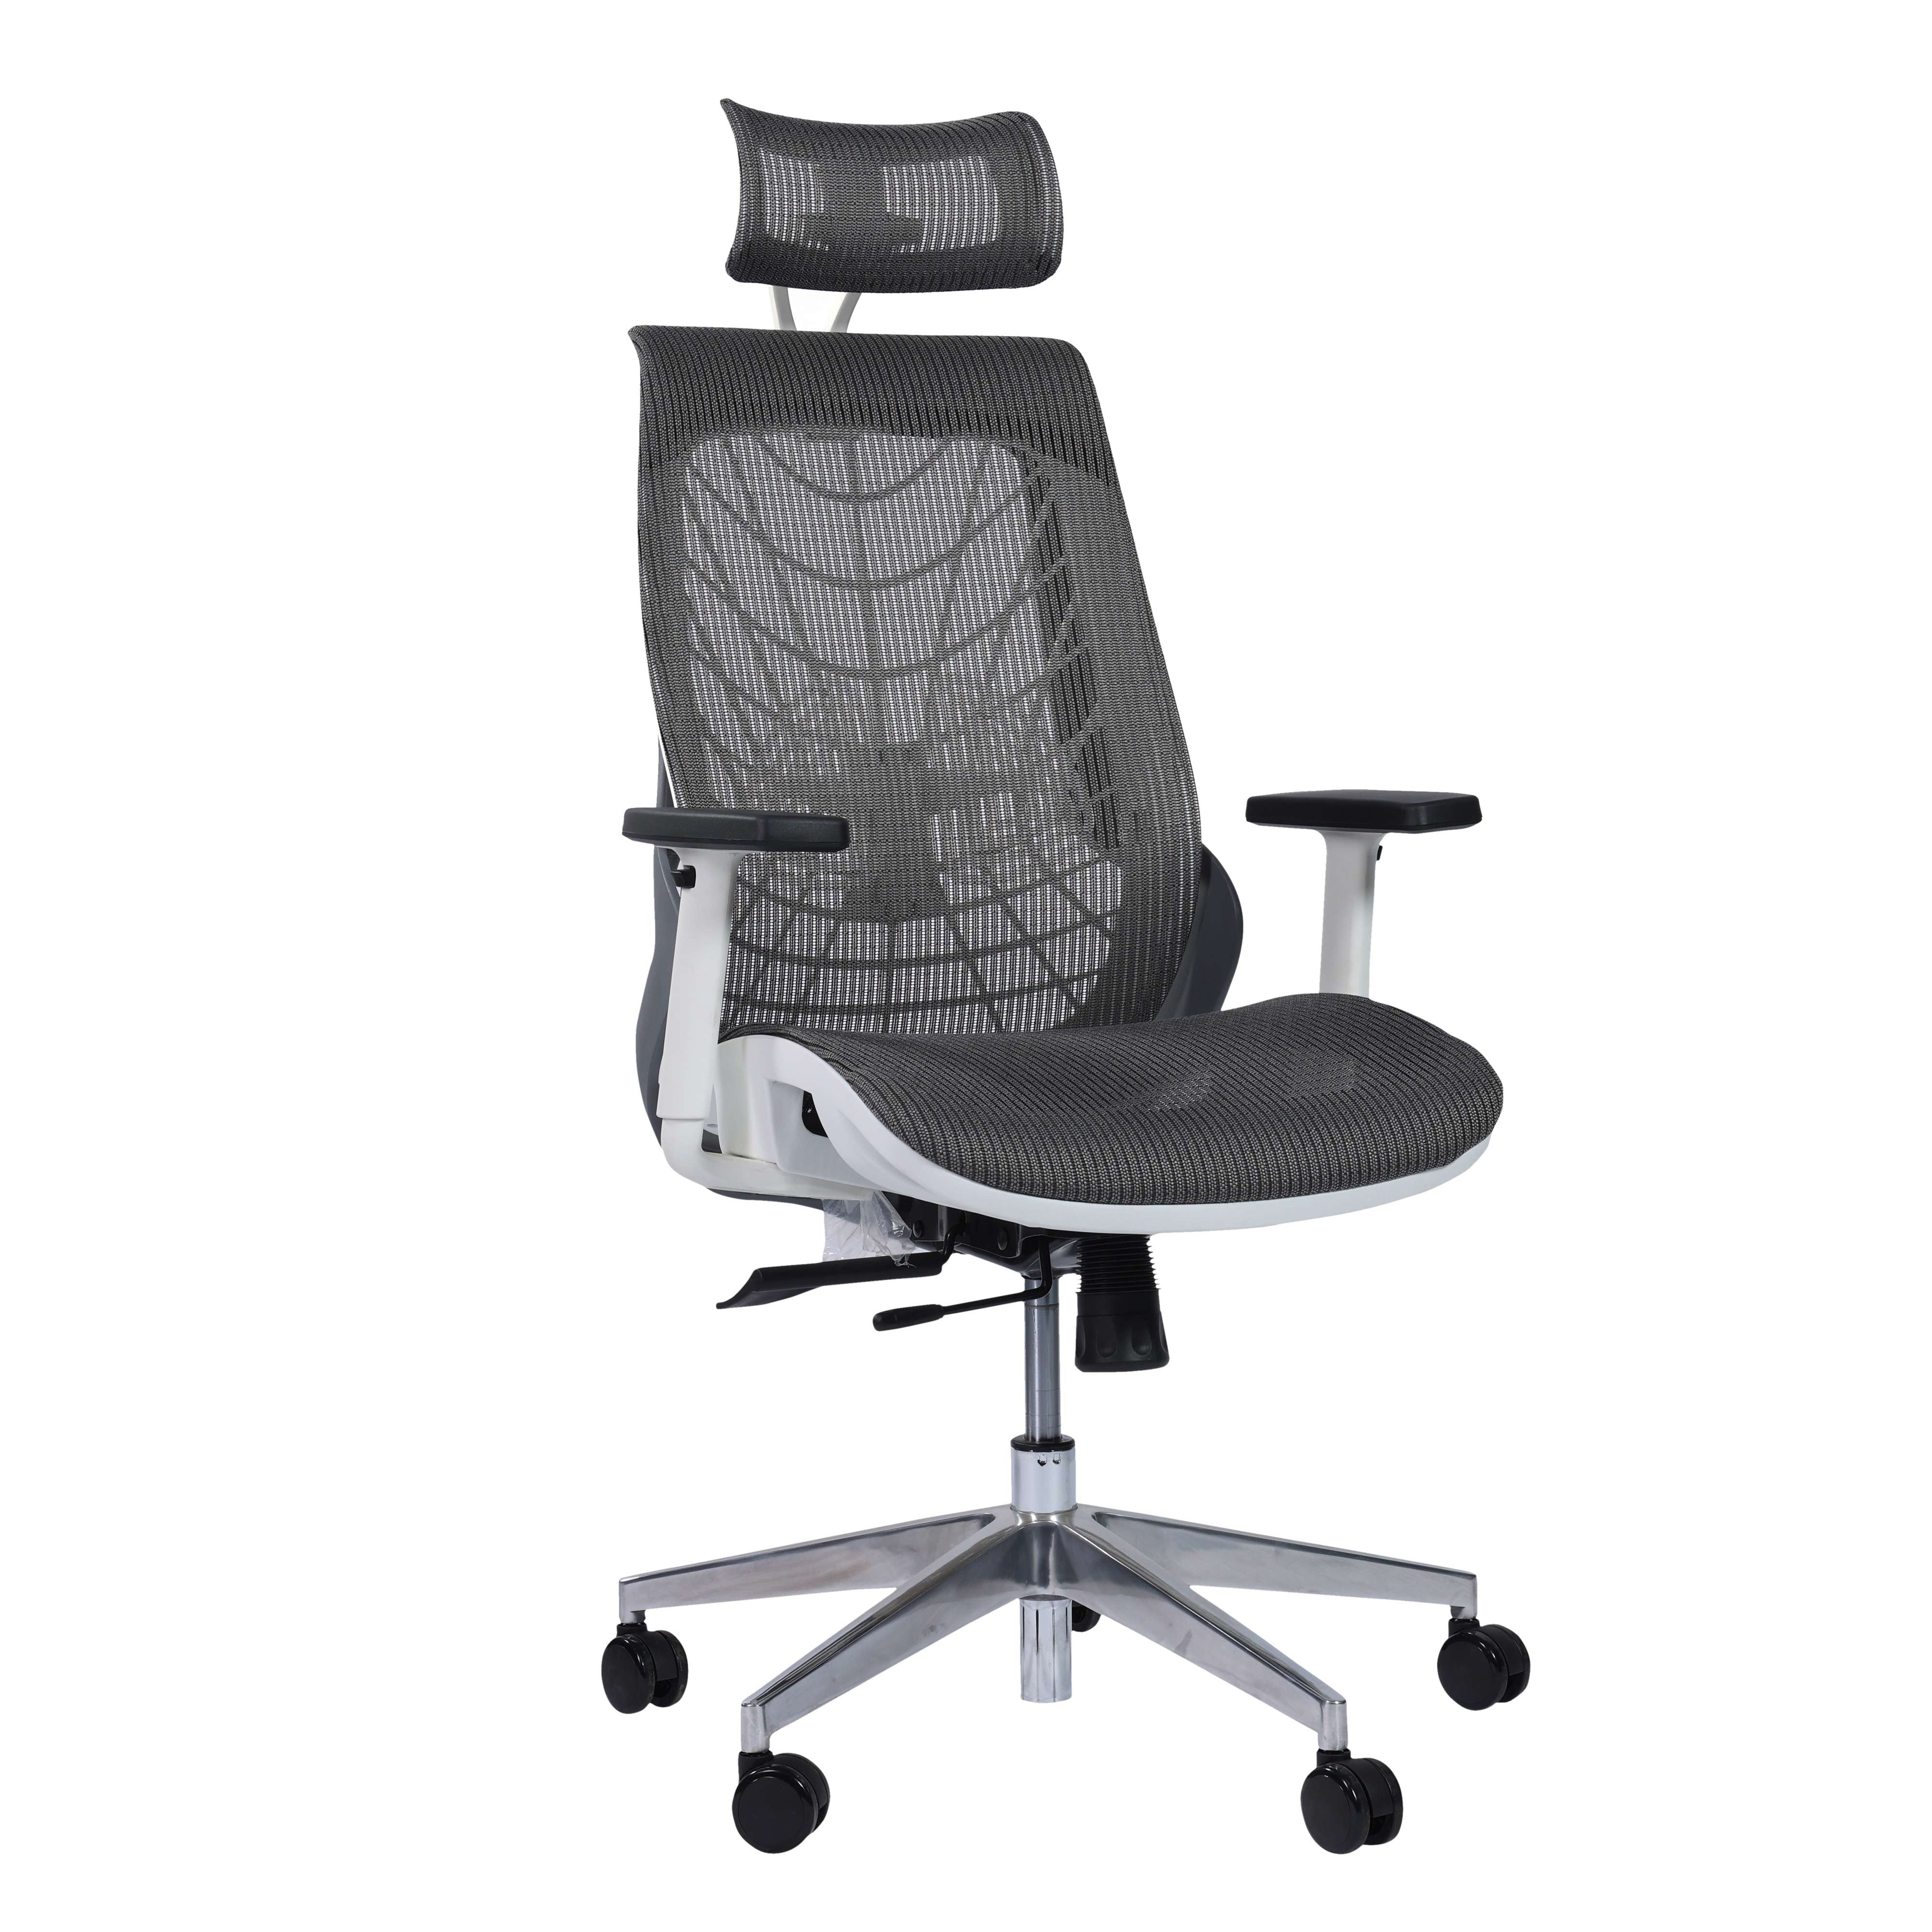 Spidy Executive Mesh High Back Office Chair with Aluminium Base